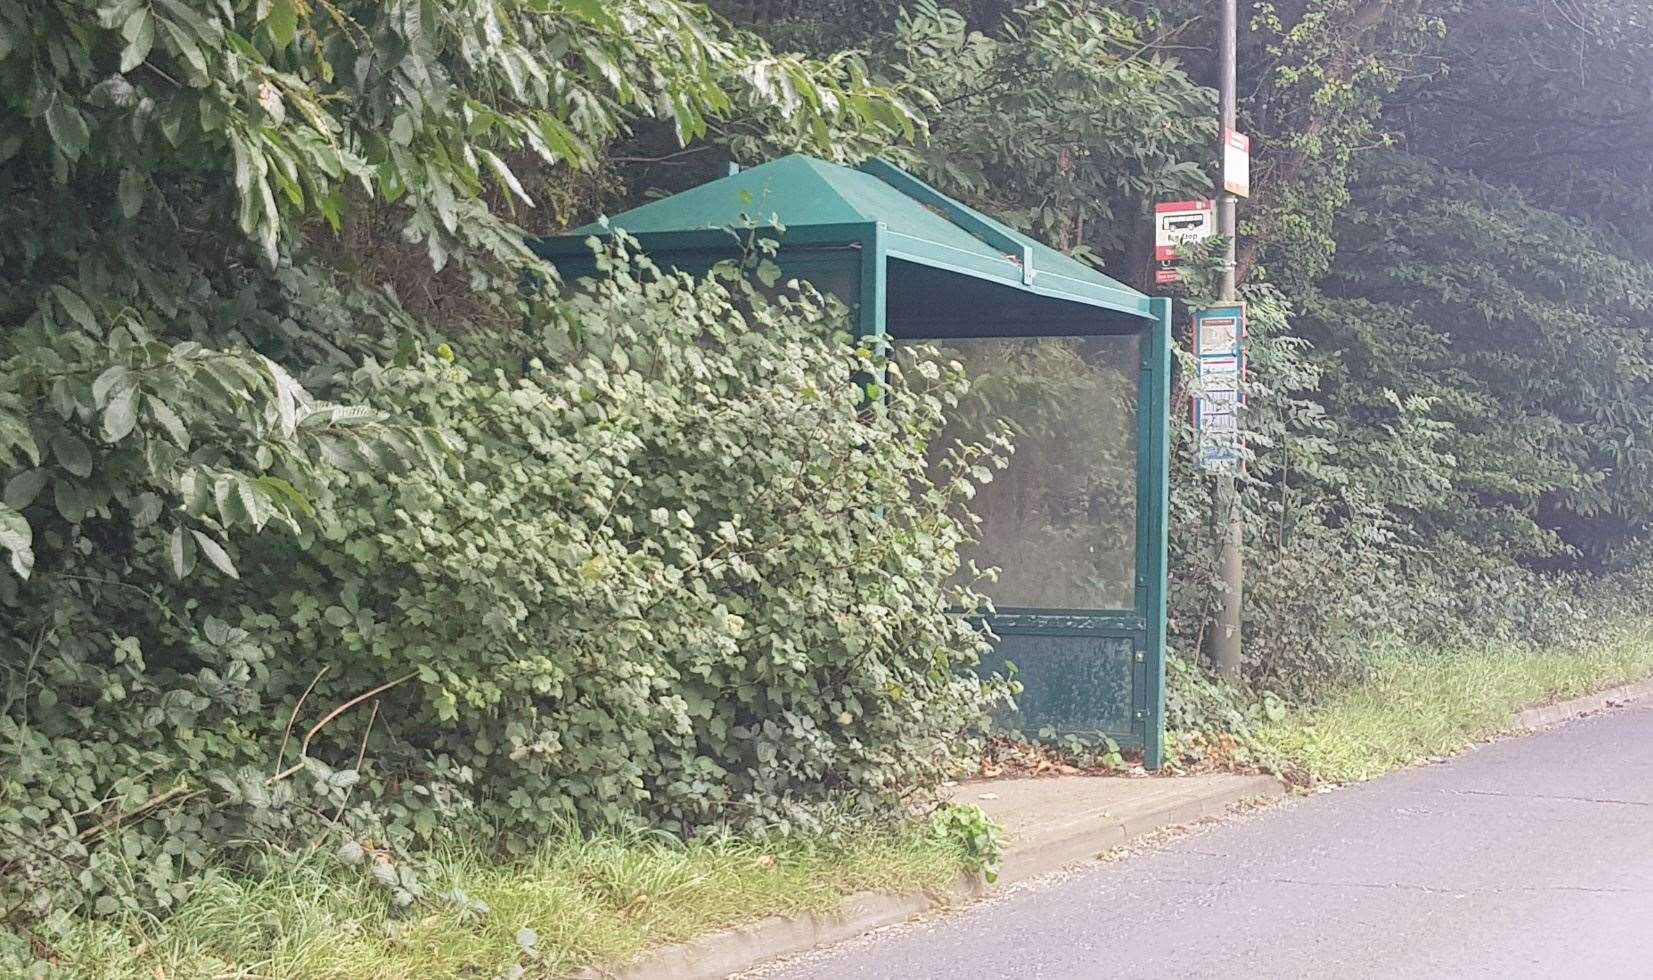 The bus shelter at Gleaming Wood Drive, Timber Tops. Picture: Vanessa Jones